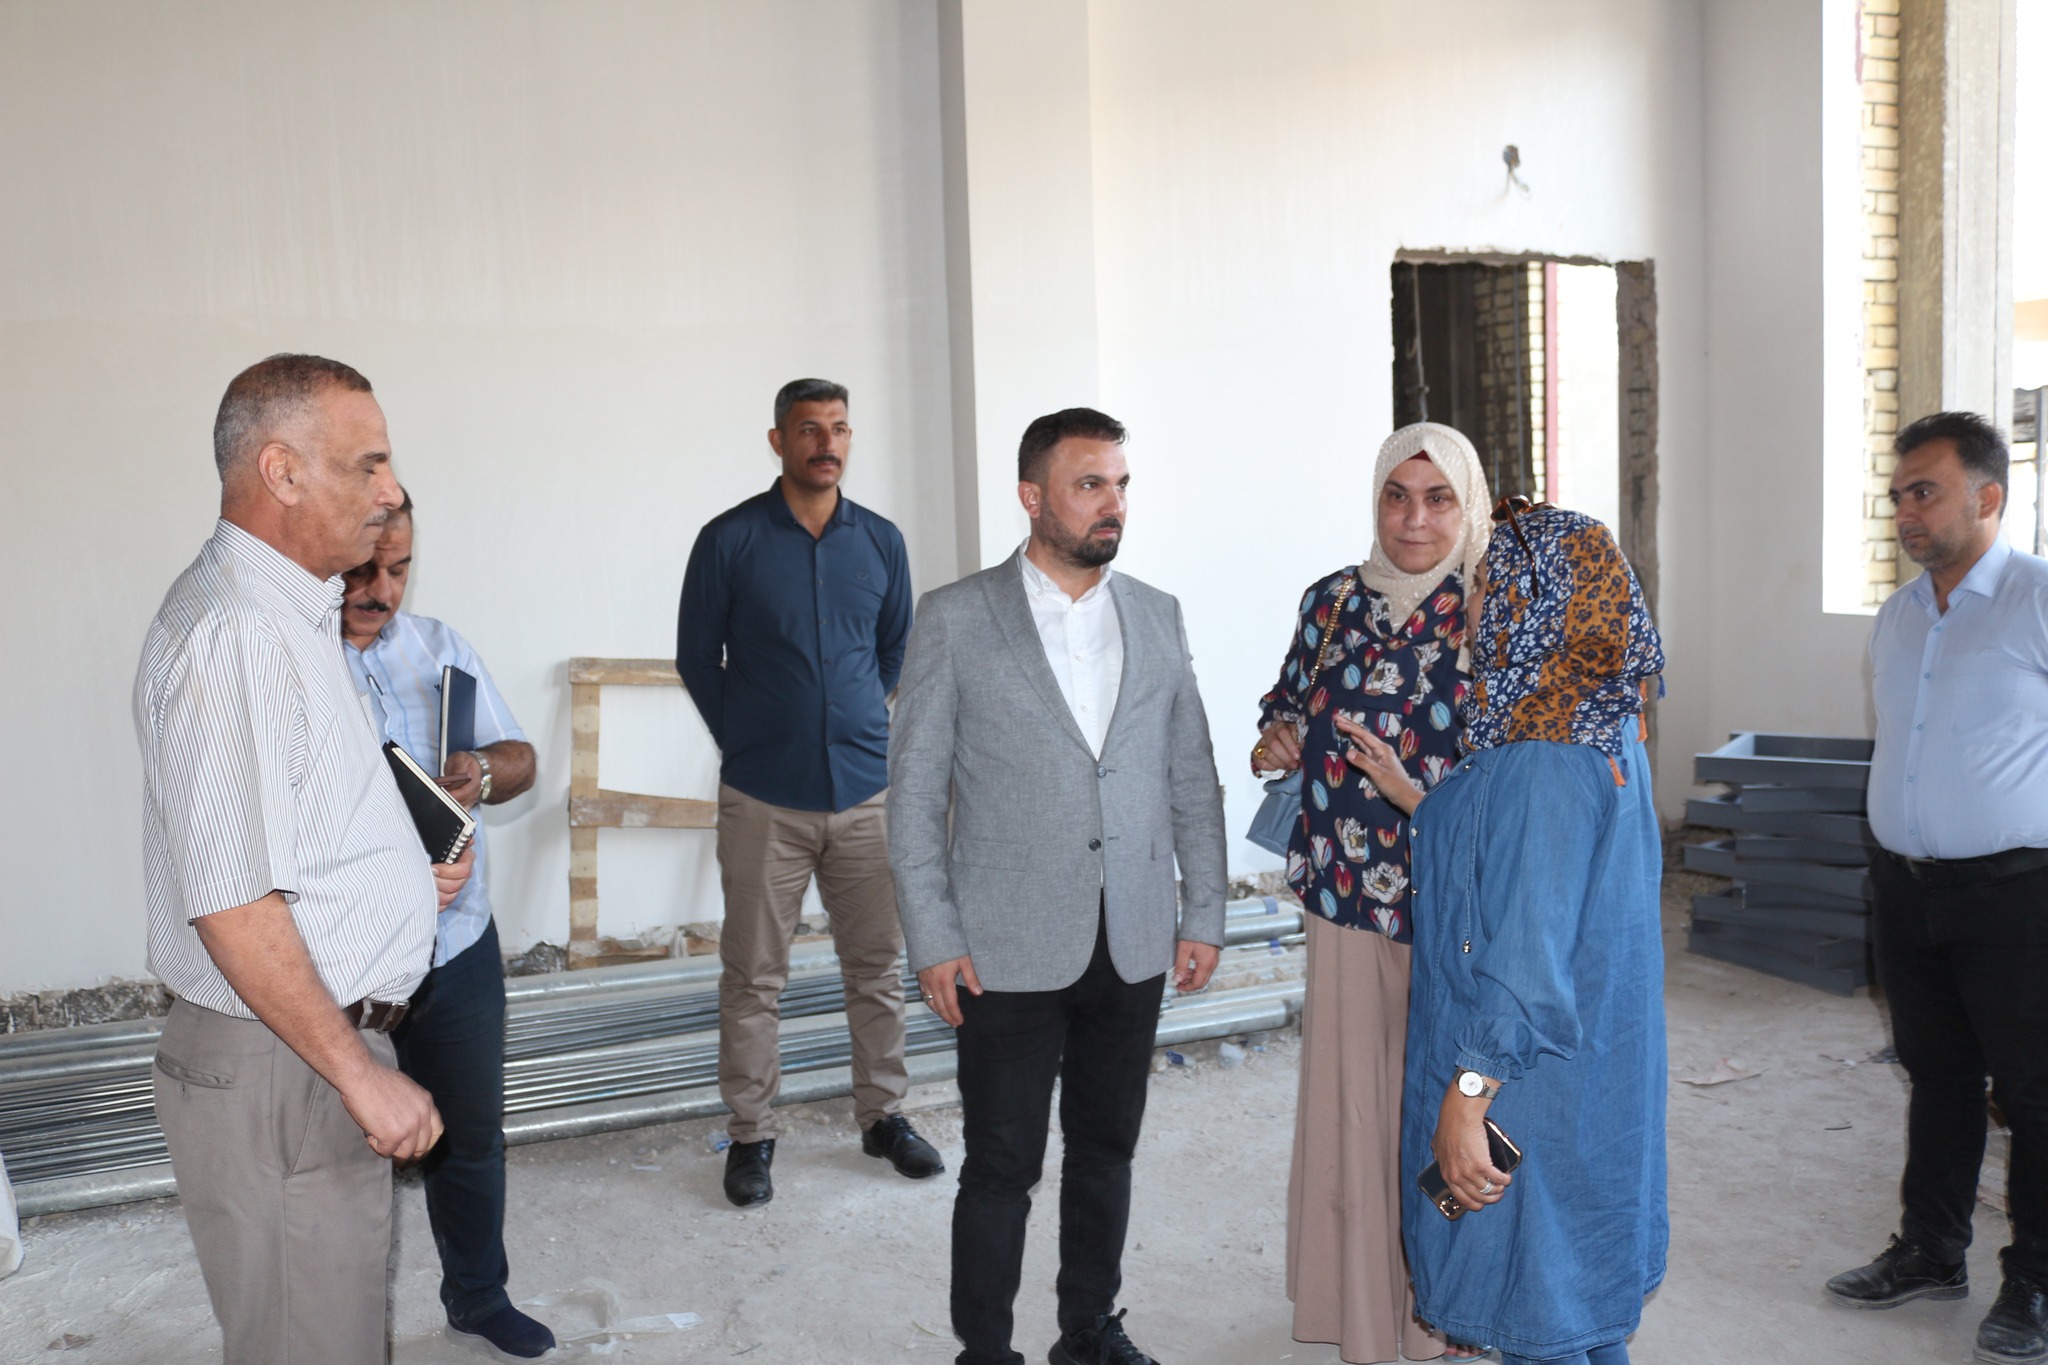 Mr. Director General explains that the current work is the completion of all parts of the cultural center building project in Al-Kadhimiya, Baghdad Governorate